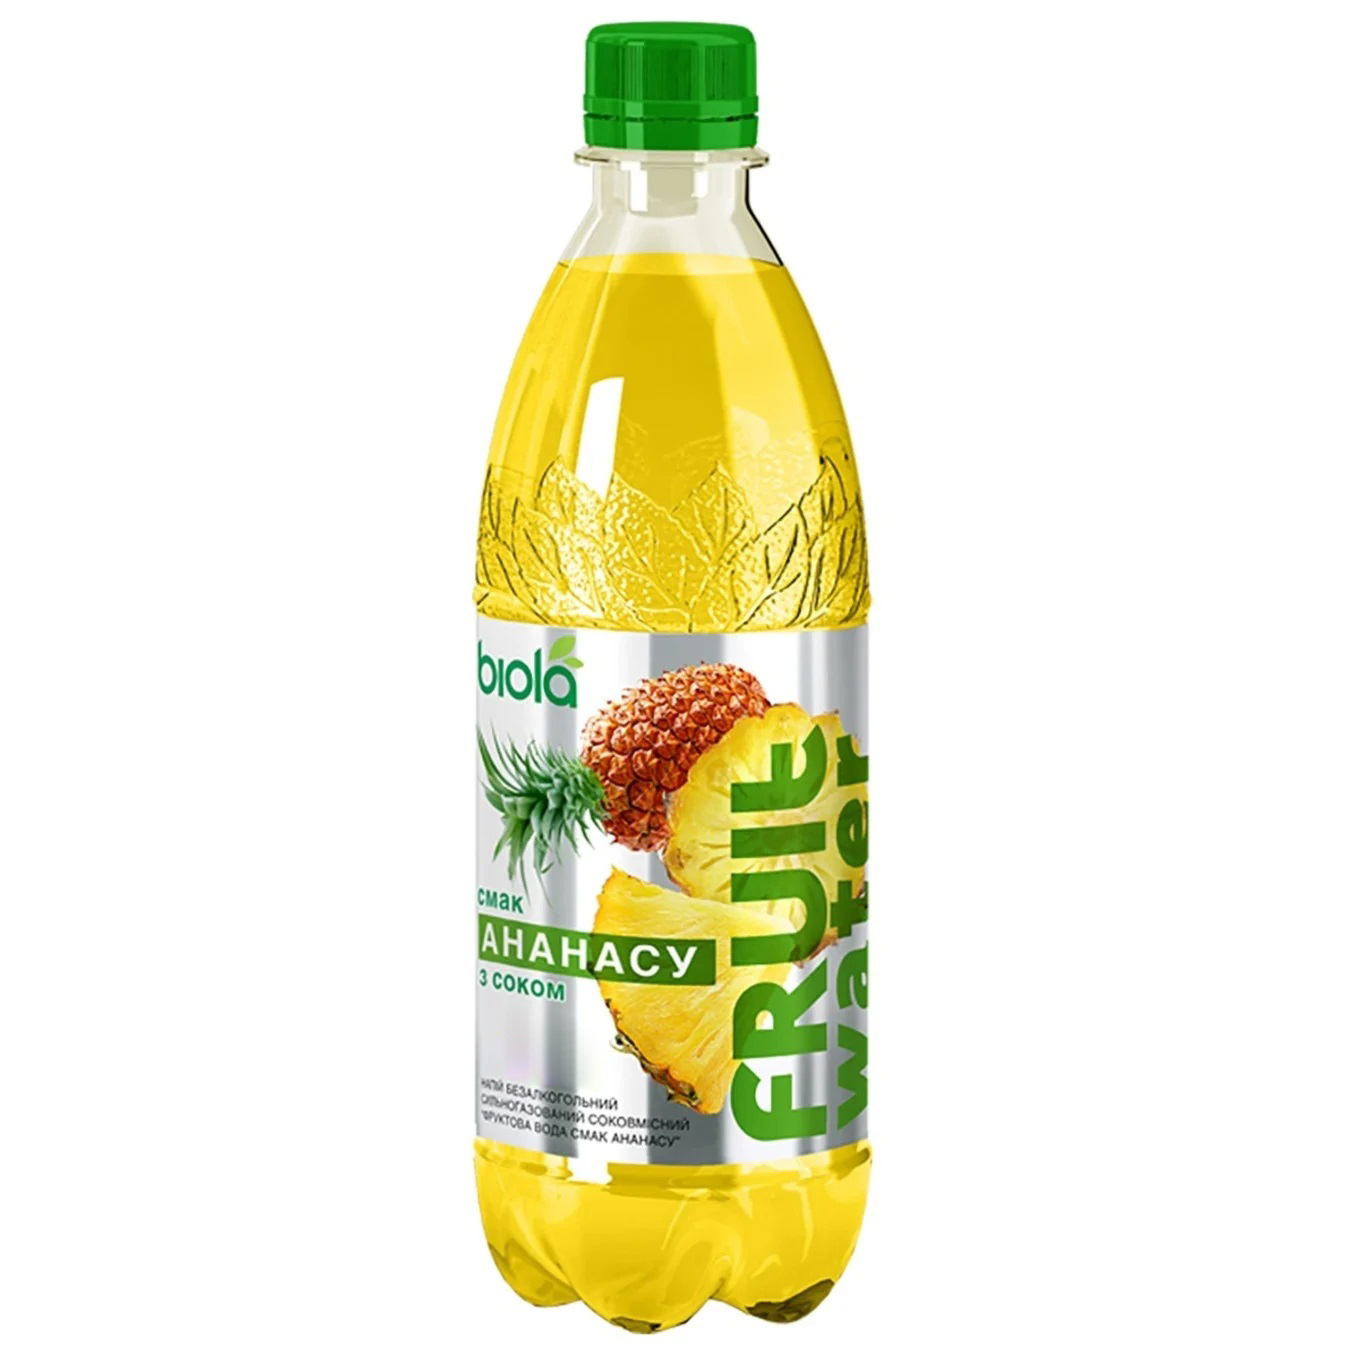 Biola highly carbonated drink Fruit water pineapple 1l